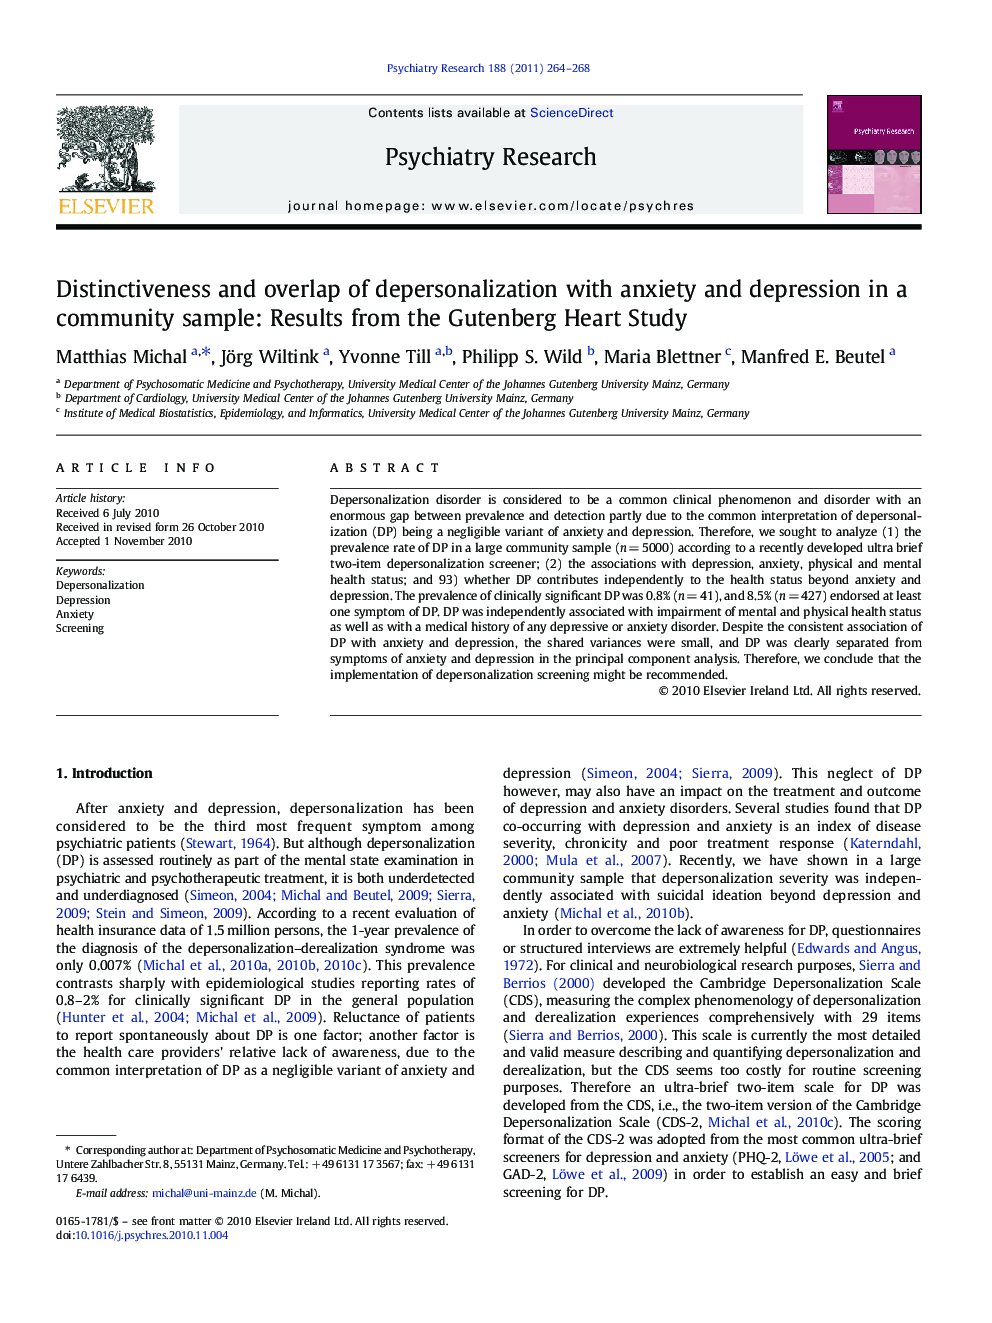 Distinctiveness and overlap of depersonalization with anxiety and depression in a community sample: Results from the Gutenberg Heart Study